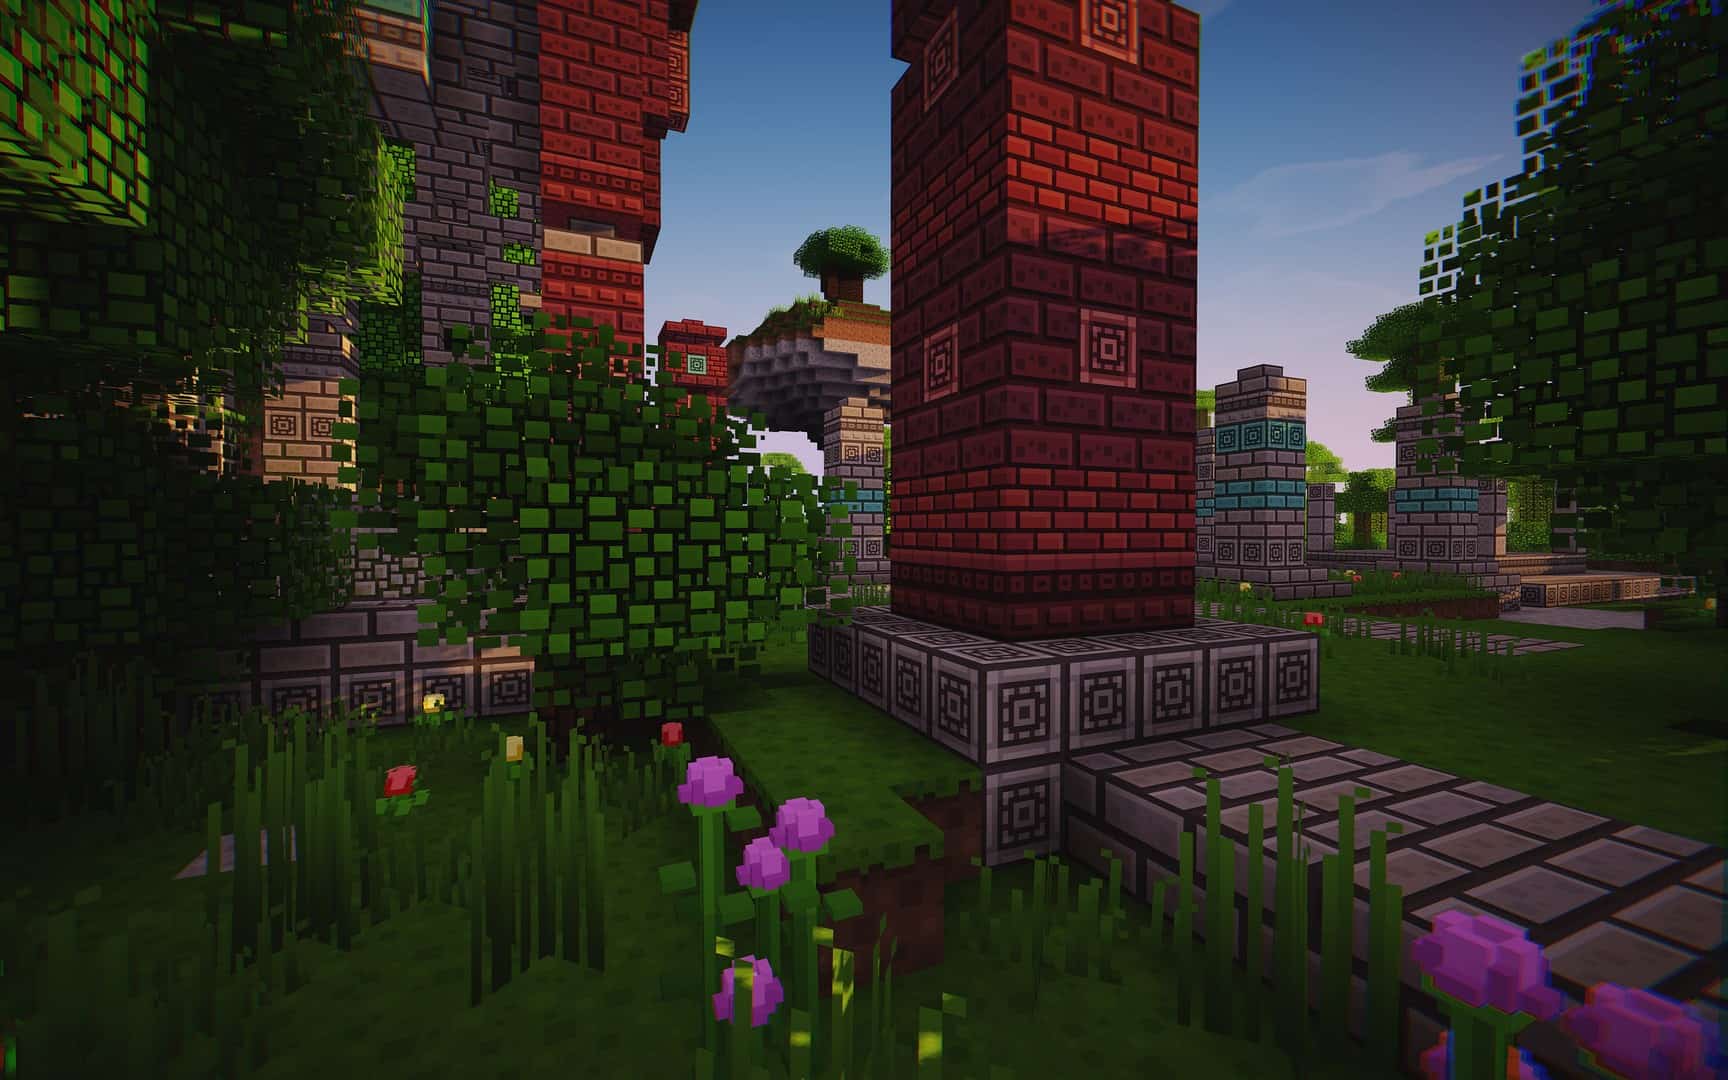 Classic 3D Texture Pack 1.20, 1.20.4 → 1.19, 1.19.4 - Download